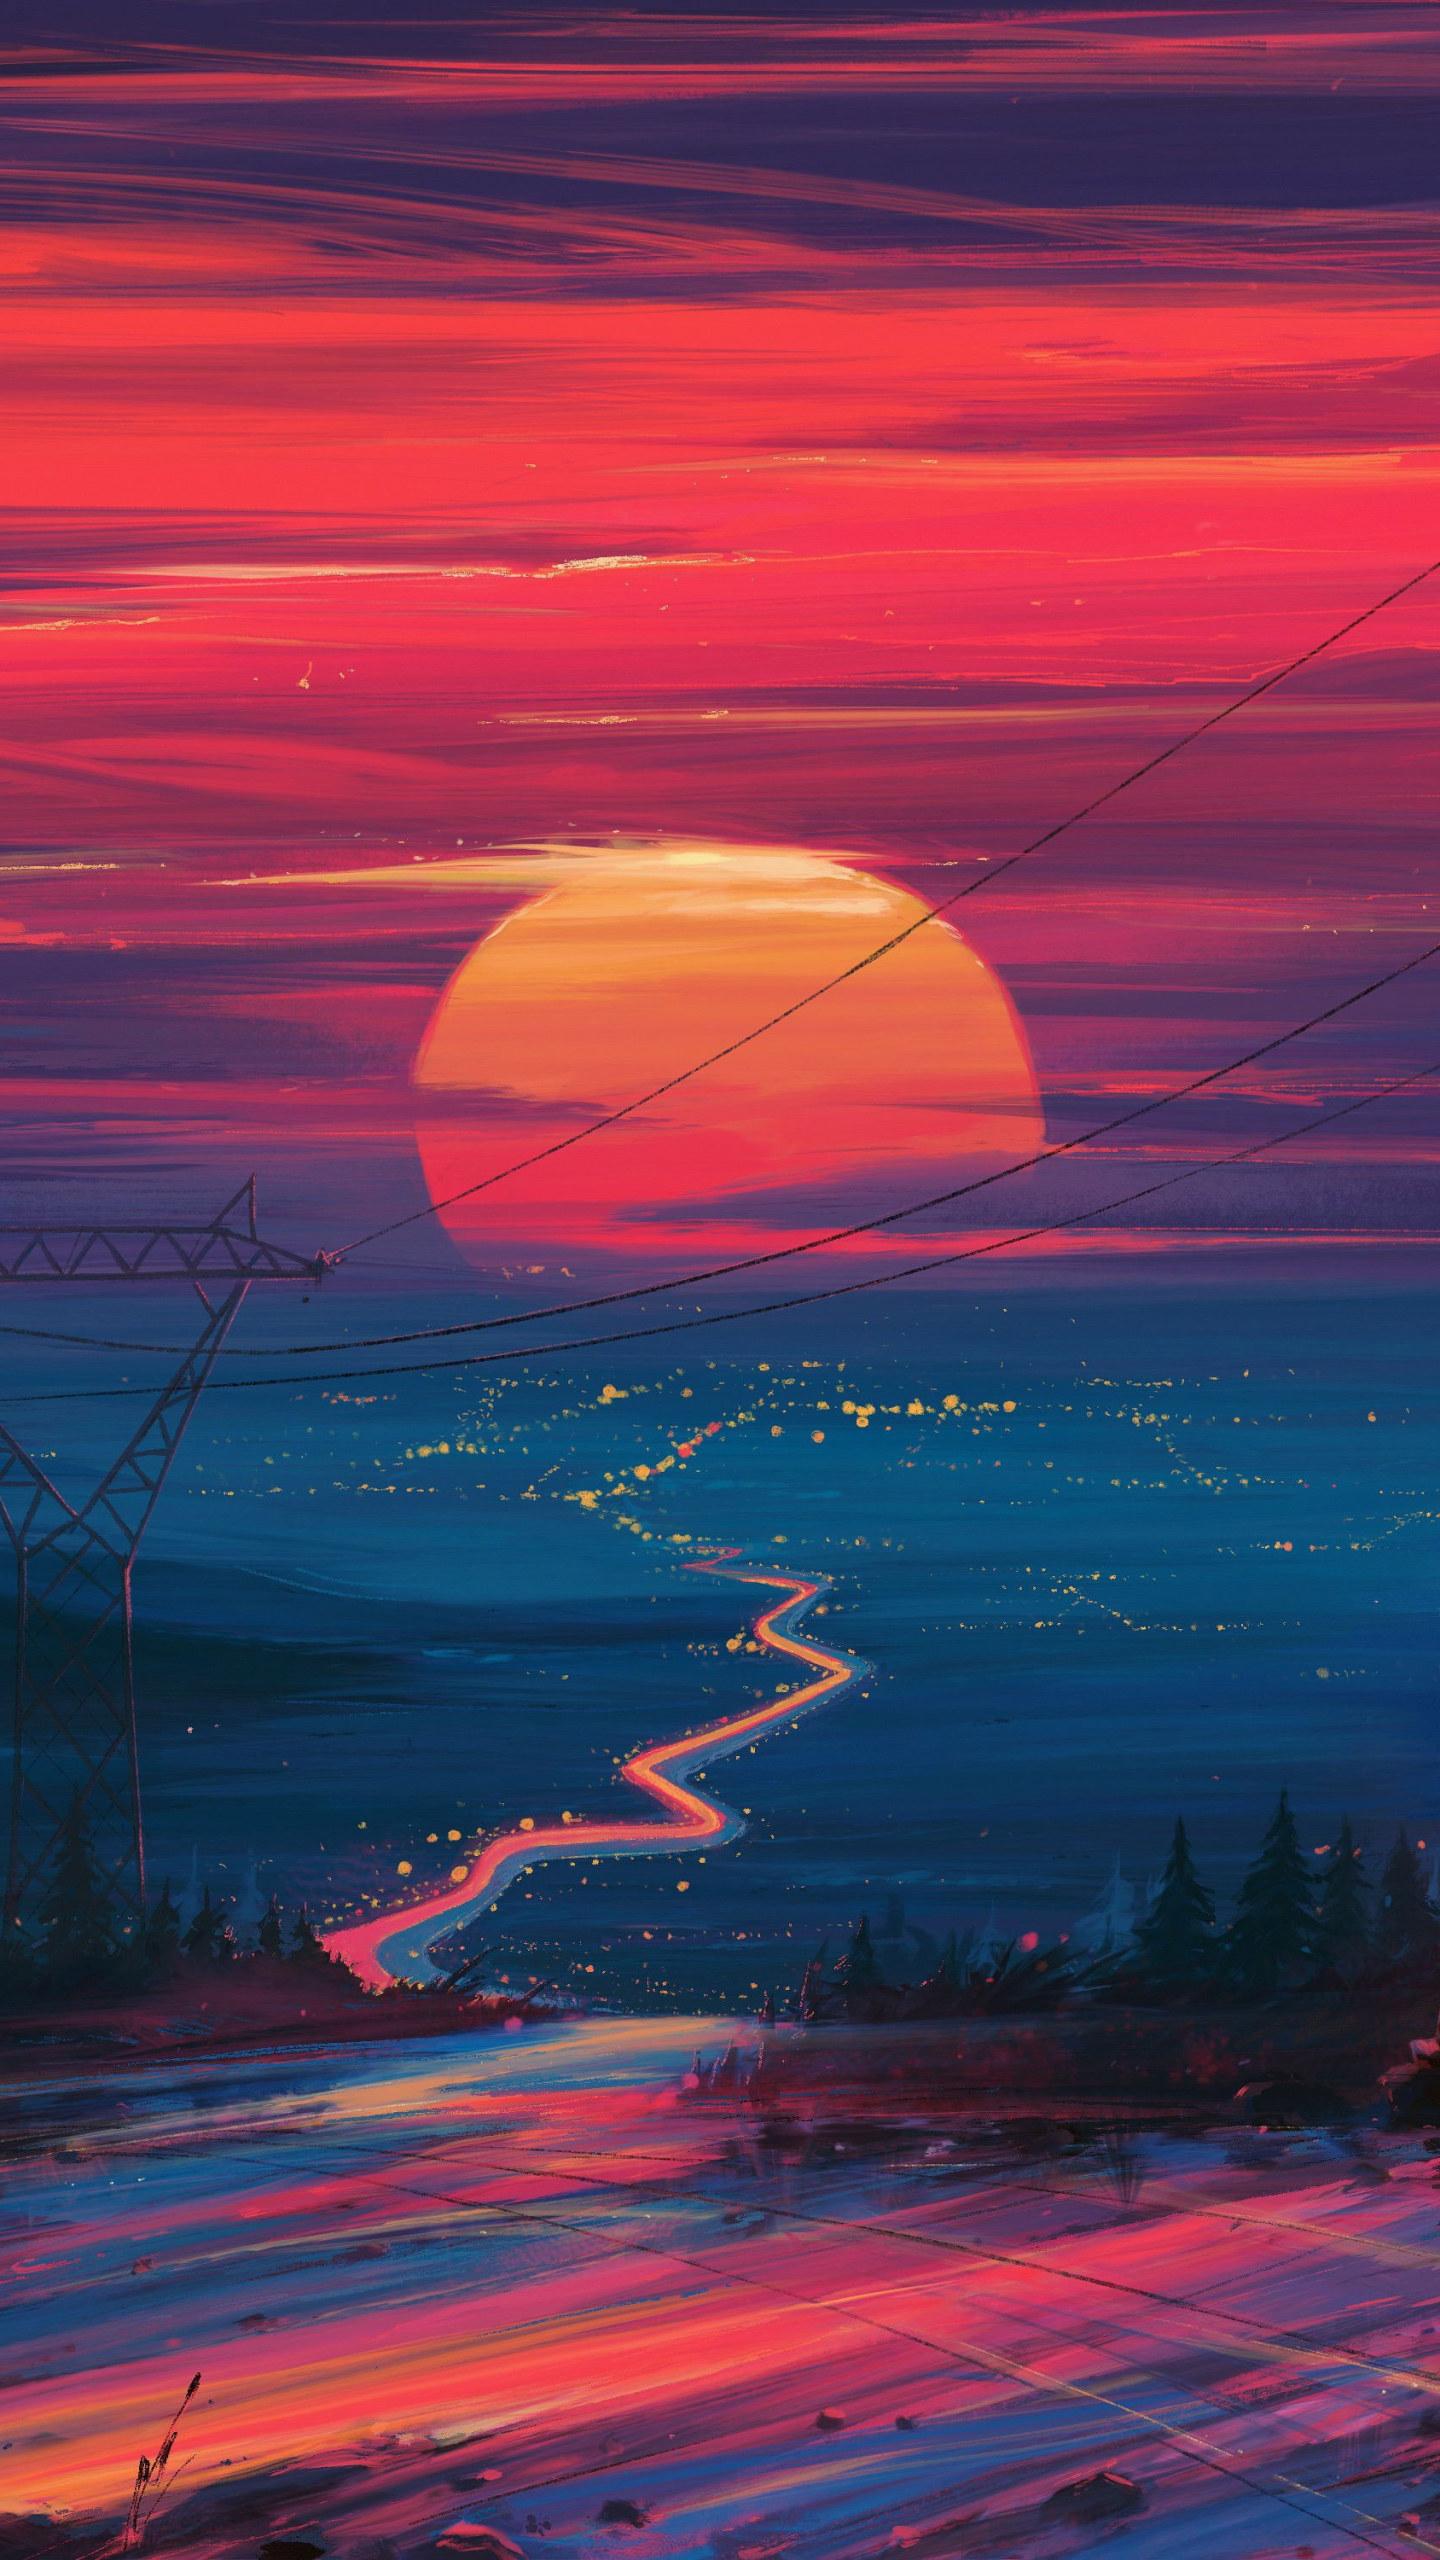 Anime Aesthetic Sunset Wallpapers - Top Free Anime Aesthetic Sunset ...